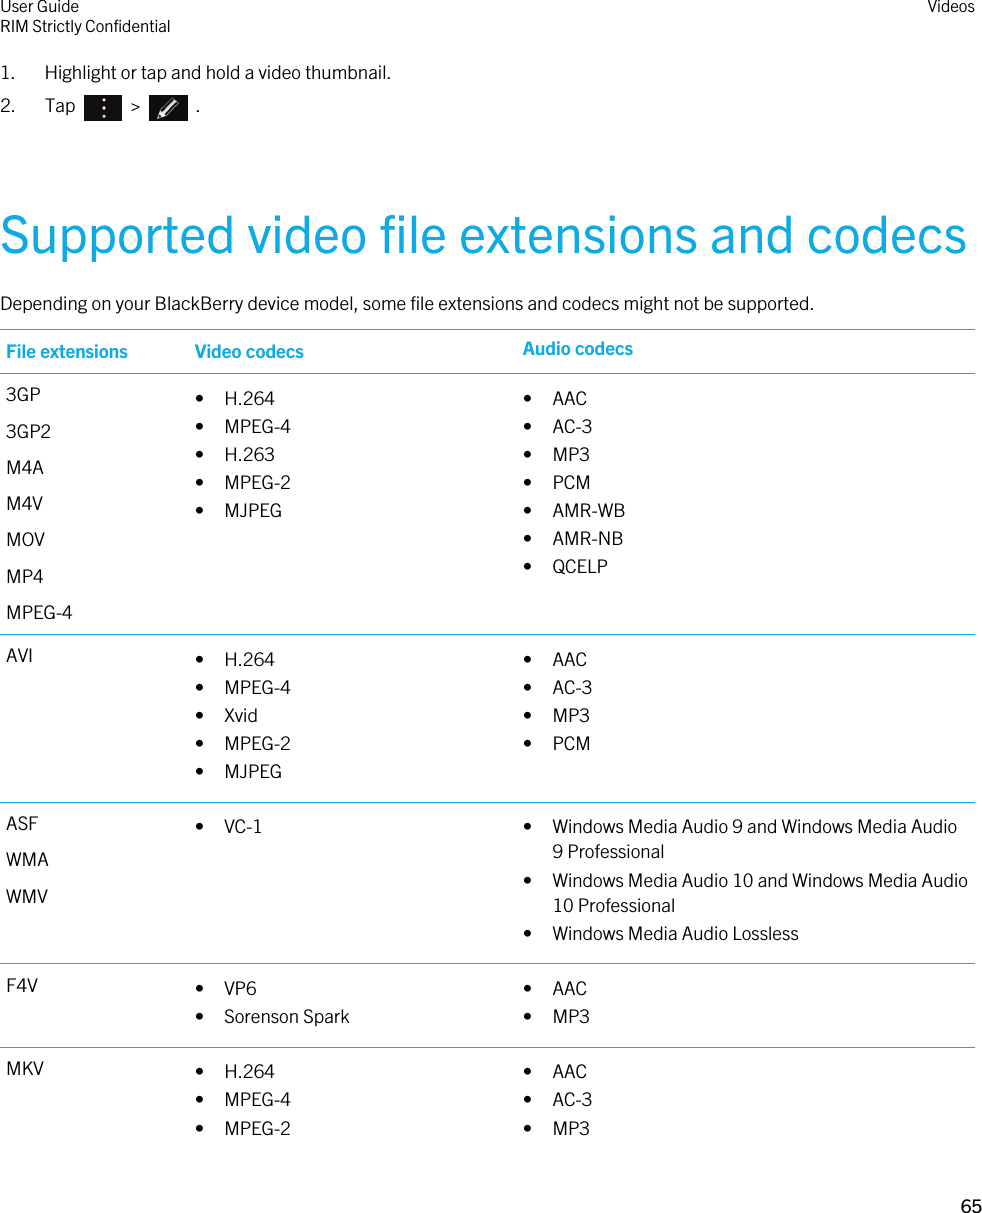 1. Highlight or tap and hold a video thumbnail.2.  Tap    &gt;    .Supported video file extensions and codecsDepending on your BlackBerry device model, some file extensions and codecs might not be supported.File extensions Video codecs Audio codecs3GP3GP2M4AM4VMOVMP4MPEG-4• H.264• MPEG-4• H.263• MPEG-2• MJPEG• AAC• AC-3• MP3• PCM• AMR-WB• AMR-NB• QCELPAVI • H.264• MPEG-4• Xvid• MPEG-2• MJPEG• AAC• AC-3• MP3• PCMASFWMAWMV• VC-1 • Windows Media Audio 9 and Windows Media Audio 9 Professional• Windows Media Audio 10 and Windows Media Audio 10 Professional• Windows Media Audio LosslessF4V • VP6• Sorenson Spark• AAC• MP3MKV • H.264• MPEG-4• MPEG-2• AAC• AC-3• MP3User GuideRIM Strictly ConfidentialVideos65 